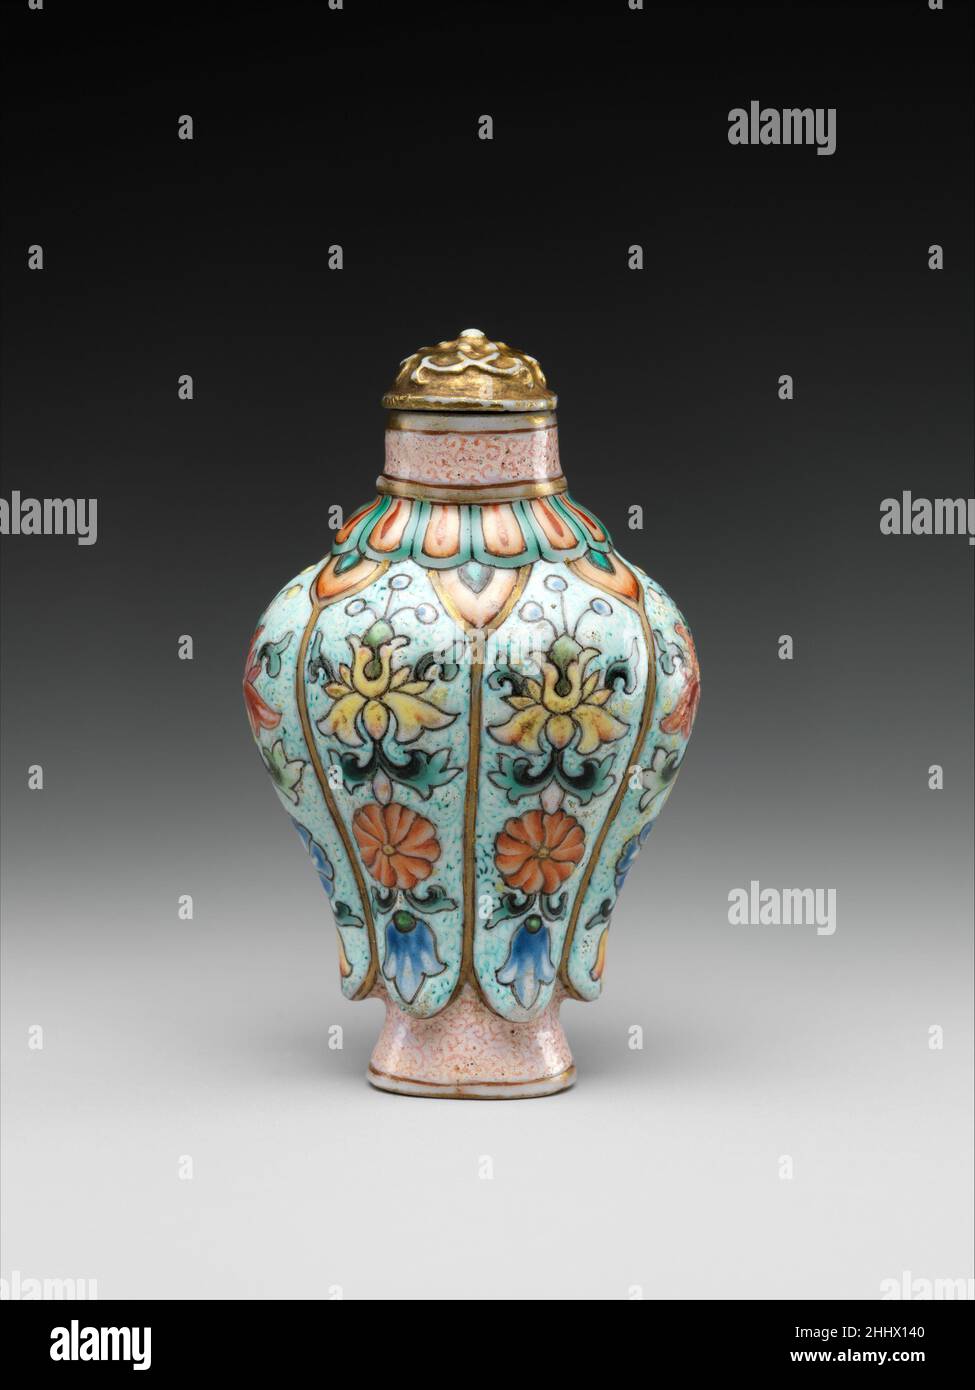 Snuff bottle in imitation of painted enamel metalwork China The eighteenth century witnessed numerous exciting innovations in Chinese ceramics. Artists produced molded or carved porcelain snuff bottles that imitated wares made of other materials, such as lacquer, wood, ivory, and, in this case, painted enamel on metalwork.. Snuff bottle in imitation of painted enamel metalwork  41333 Stock Photo